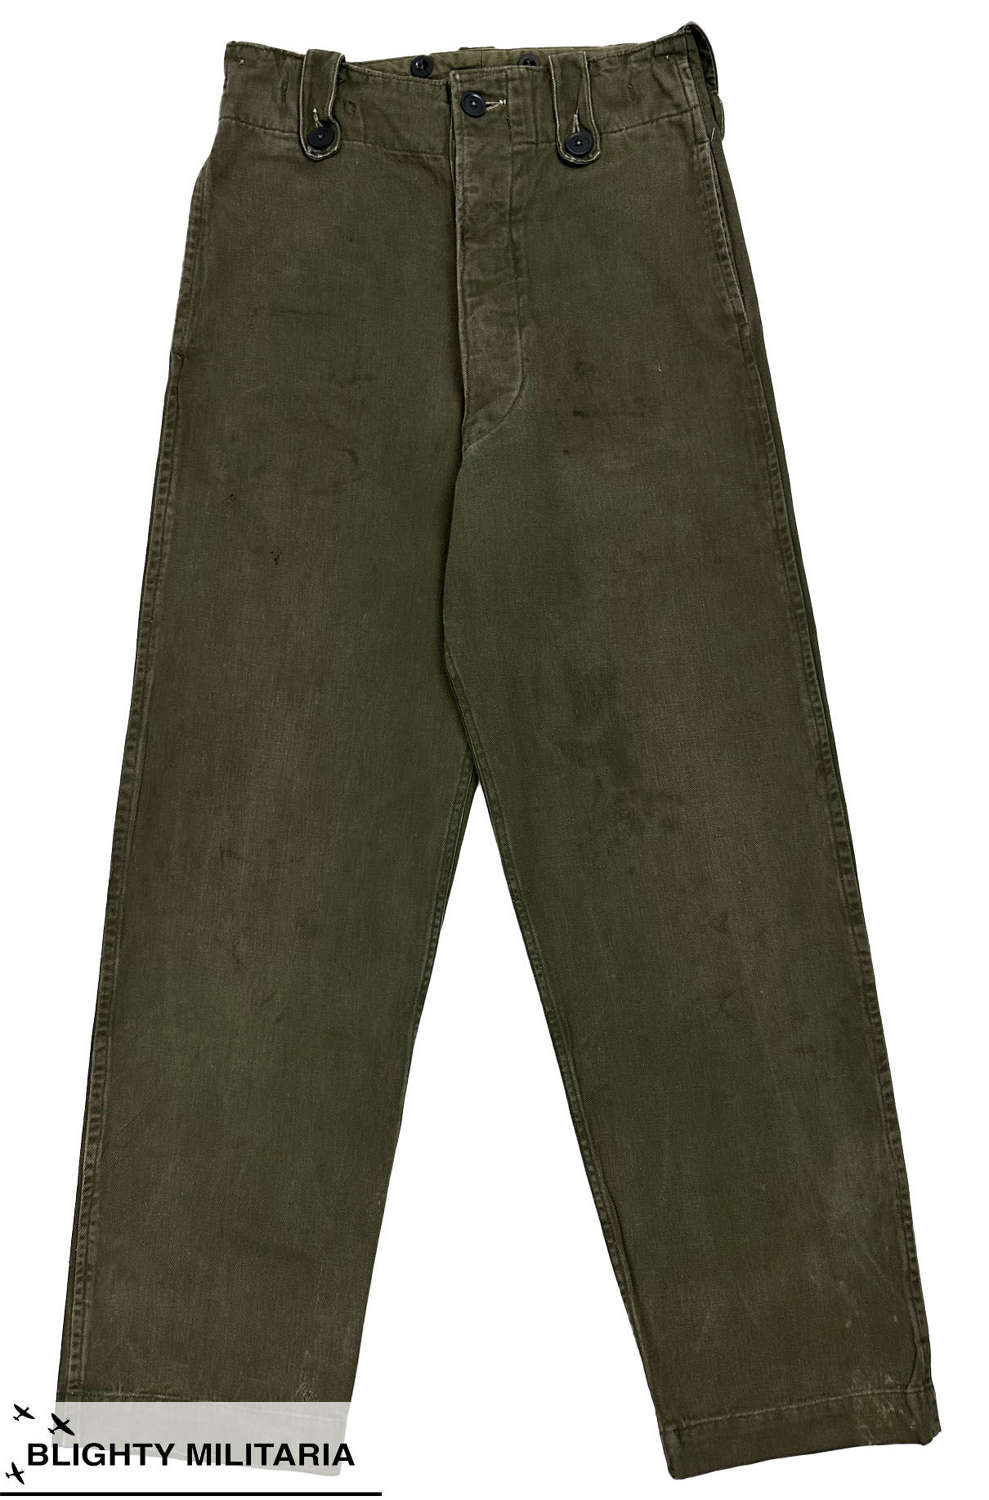 Original 1960s British Overall Green Trousers - Size 29x29